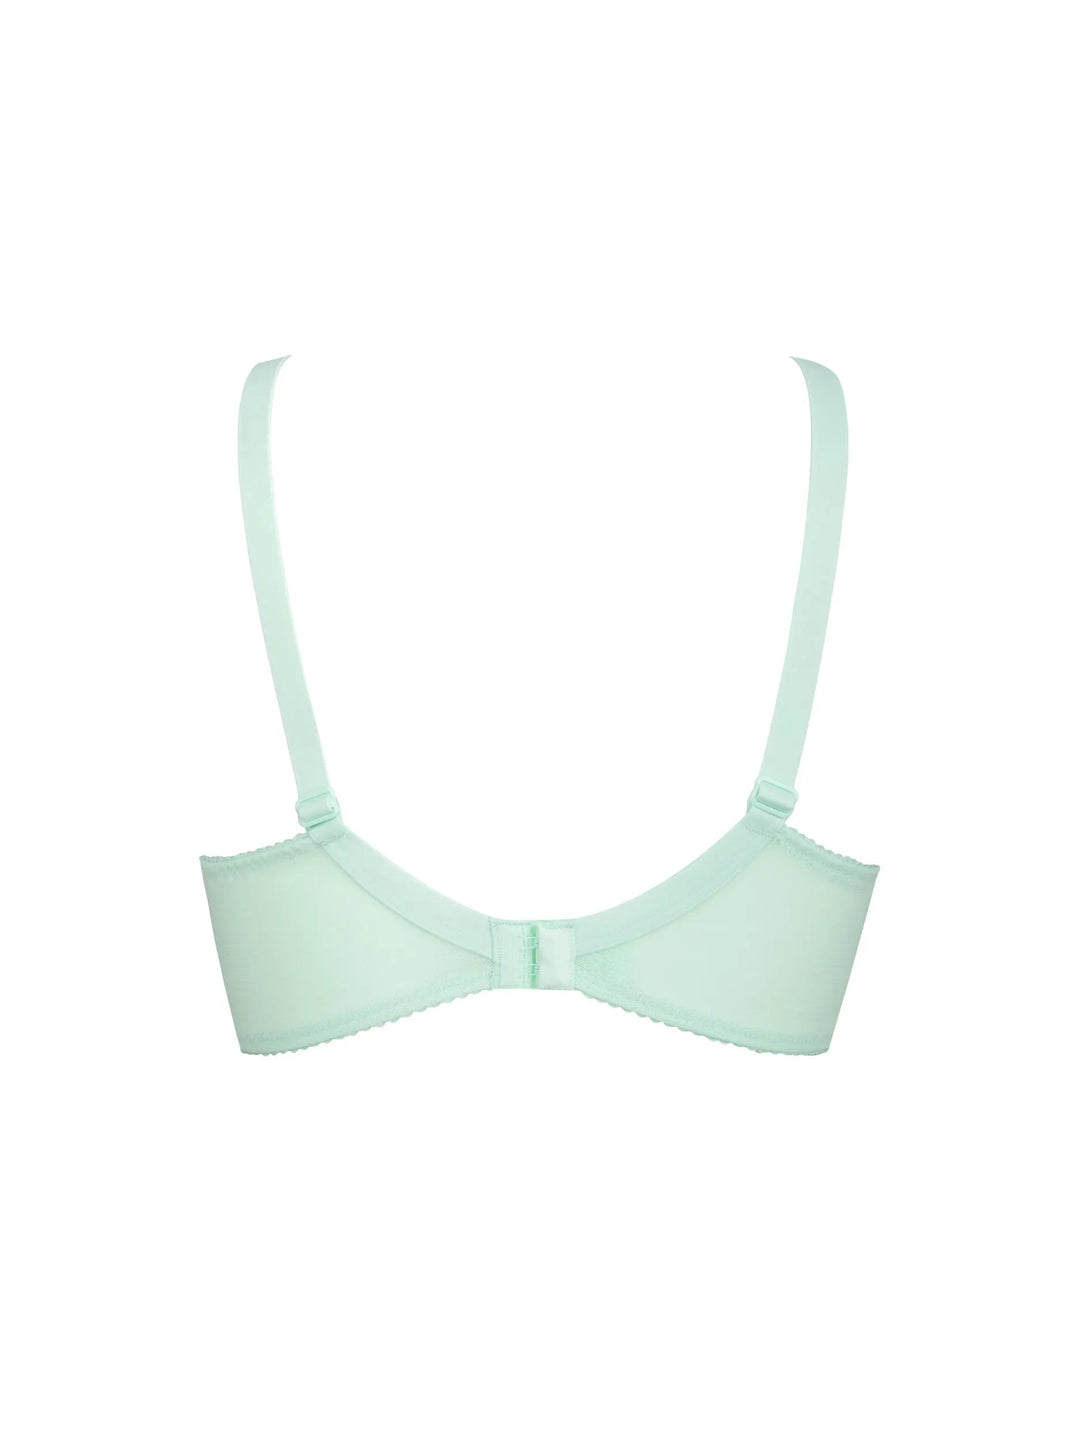 Lise Charmel Amour Nymphea 3 Parts Full Cup Bra - Jade Aqua Full Cup Bra Lise Charmel 